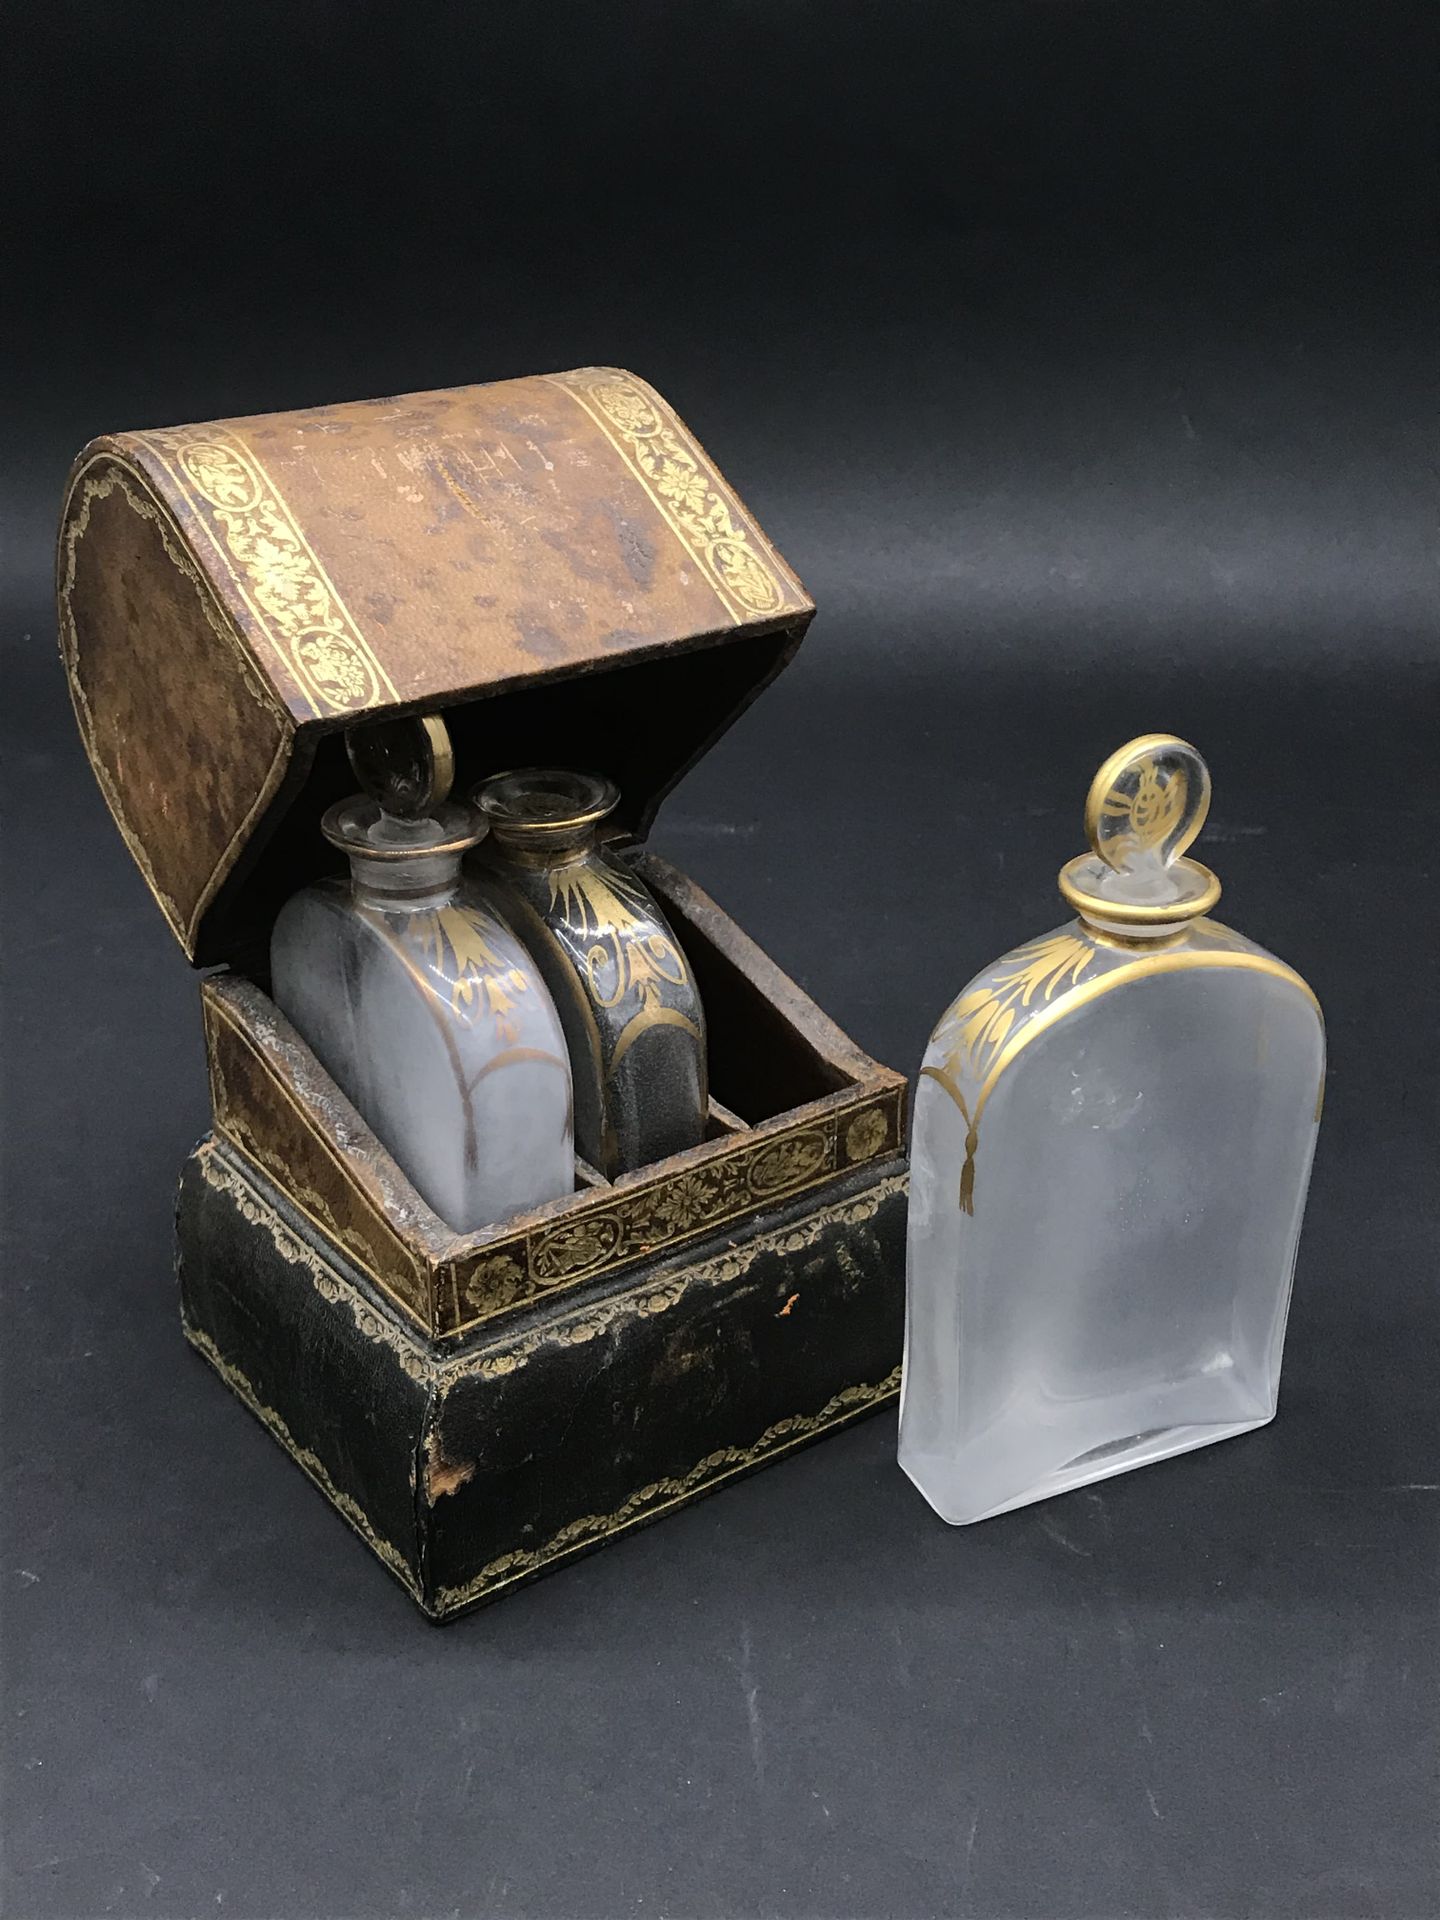 Null PERFUME SET

Box sheathed in gilded leather decorated with two coats of arm&hellip;